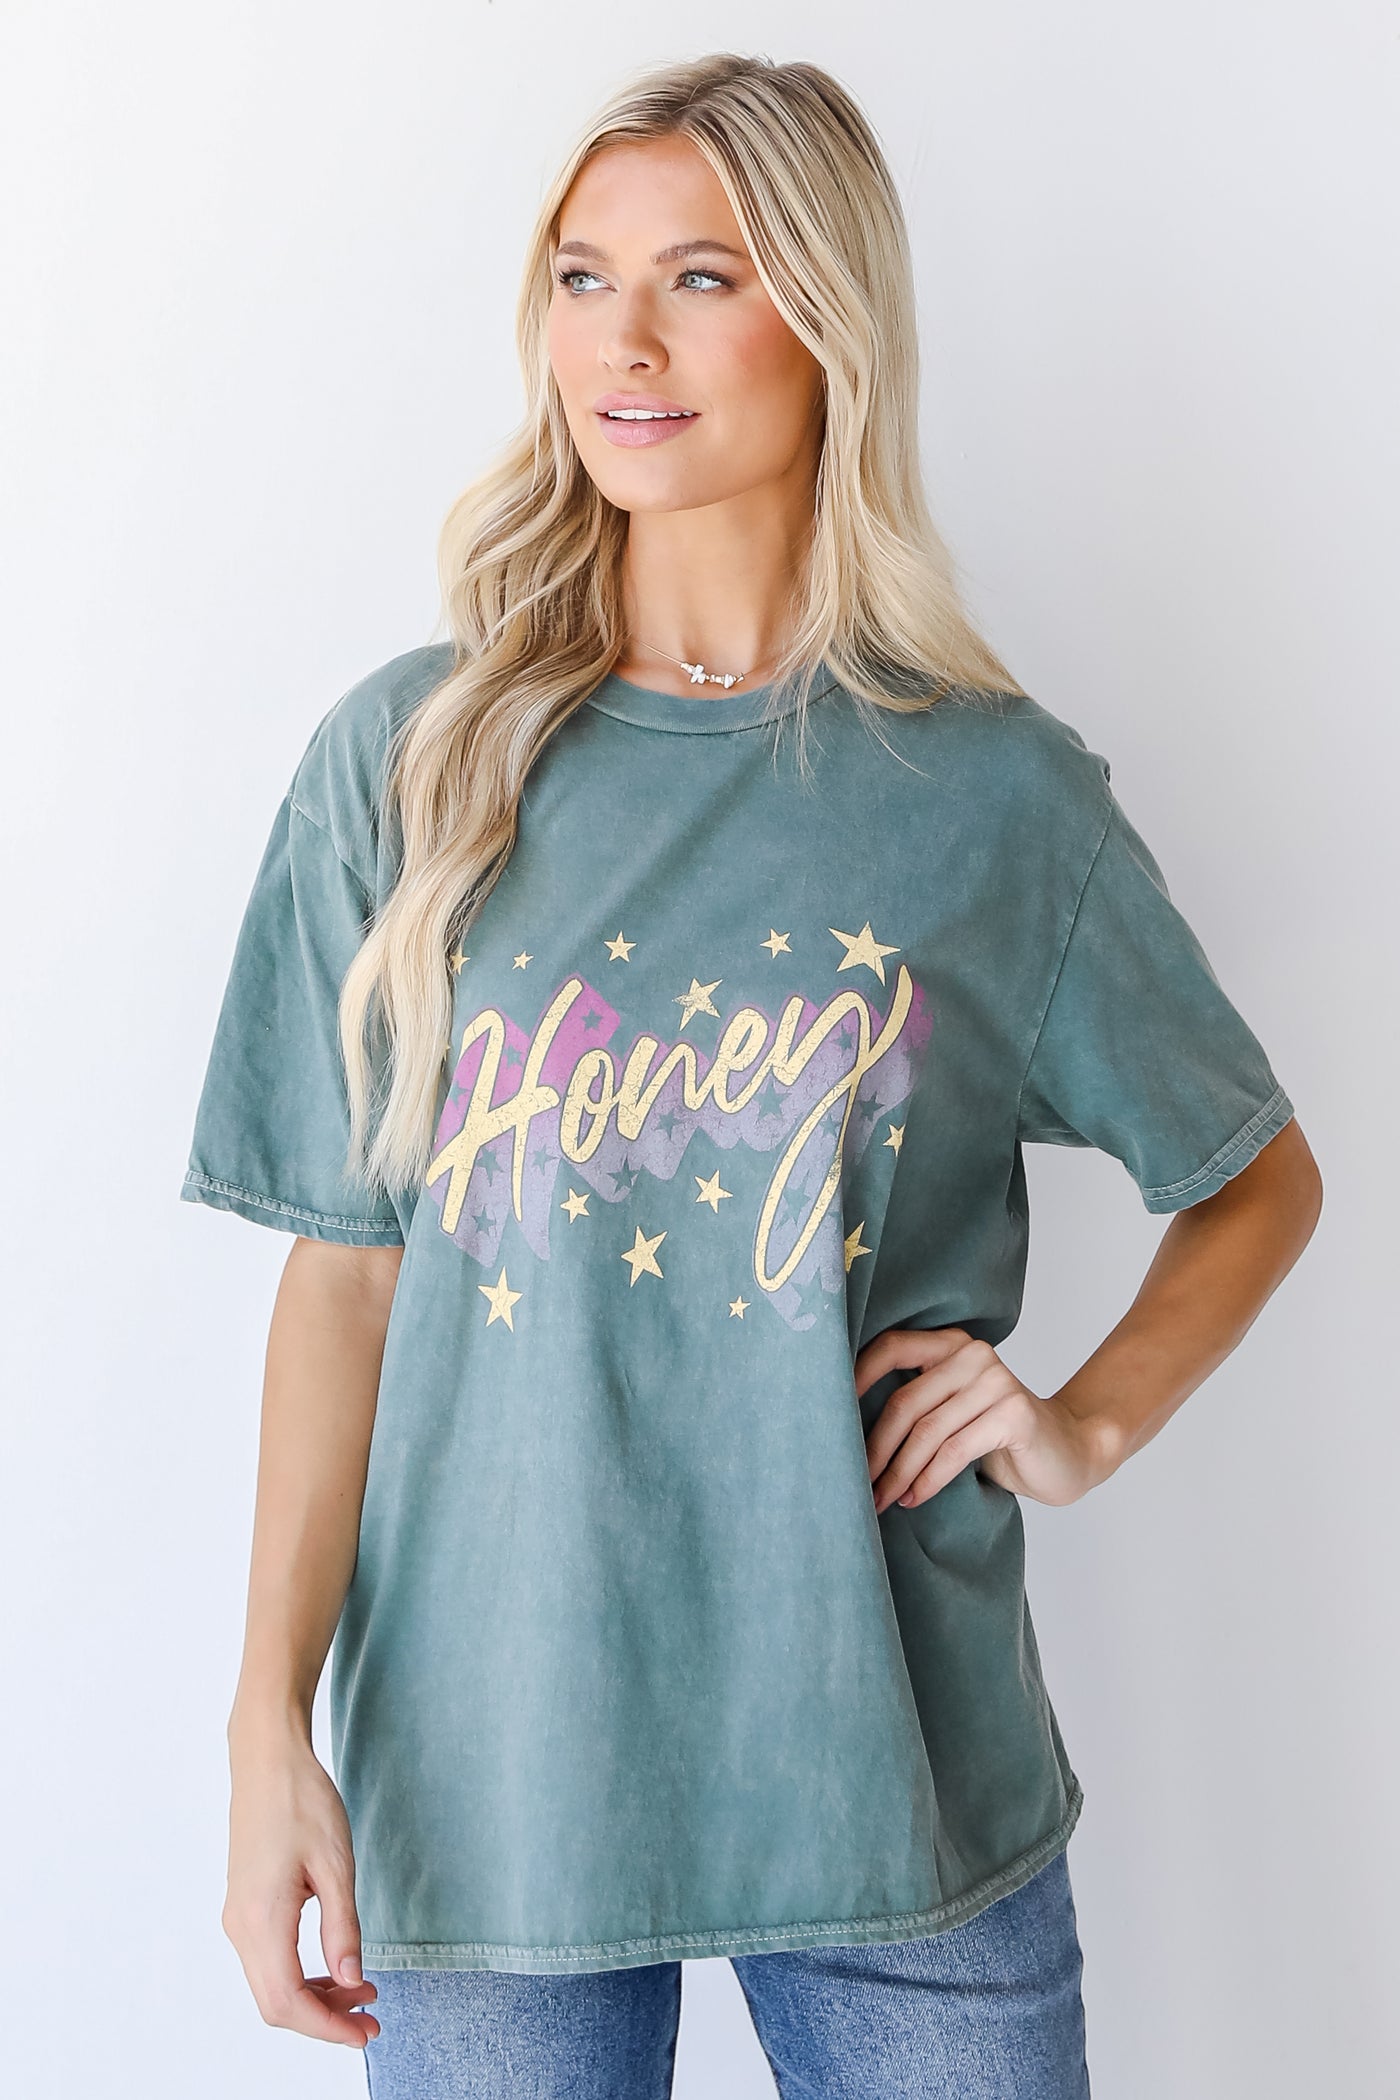 Honey Vintage Graphic Tee front view